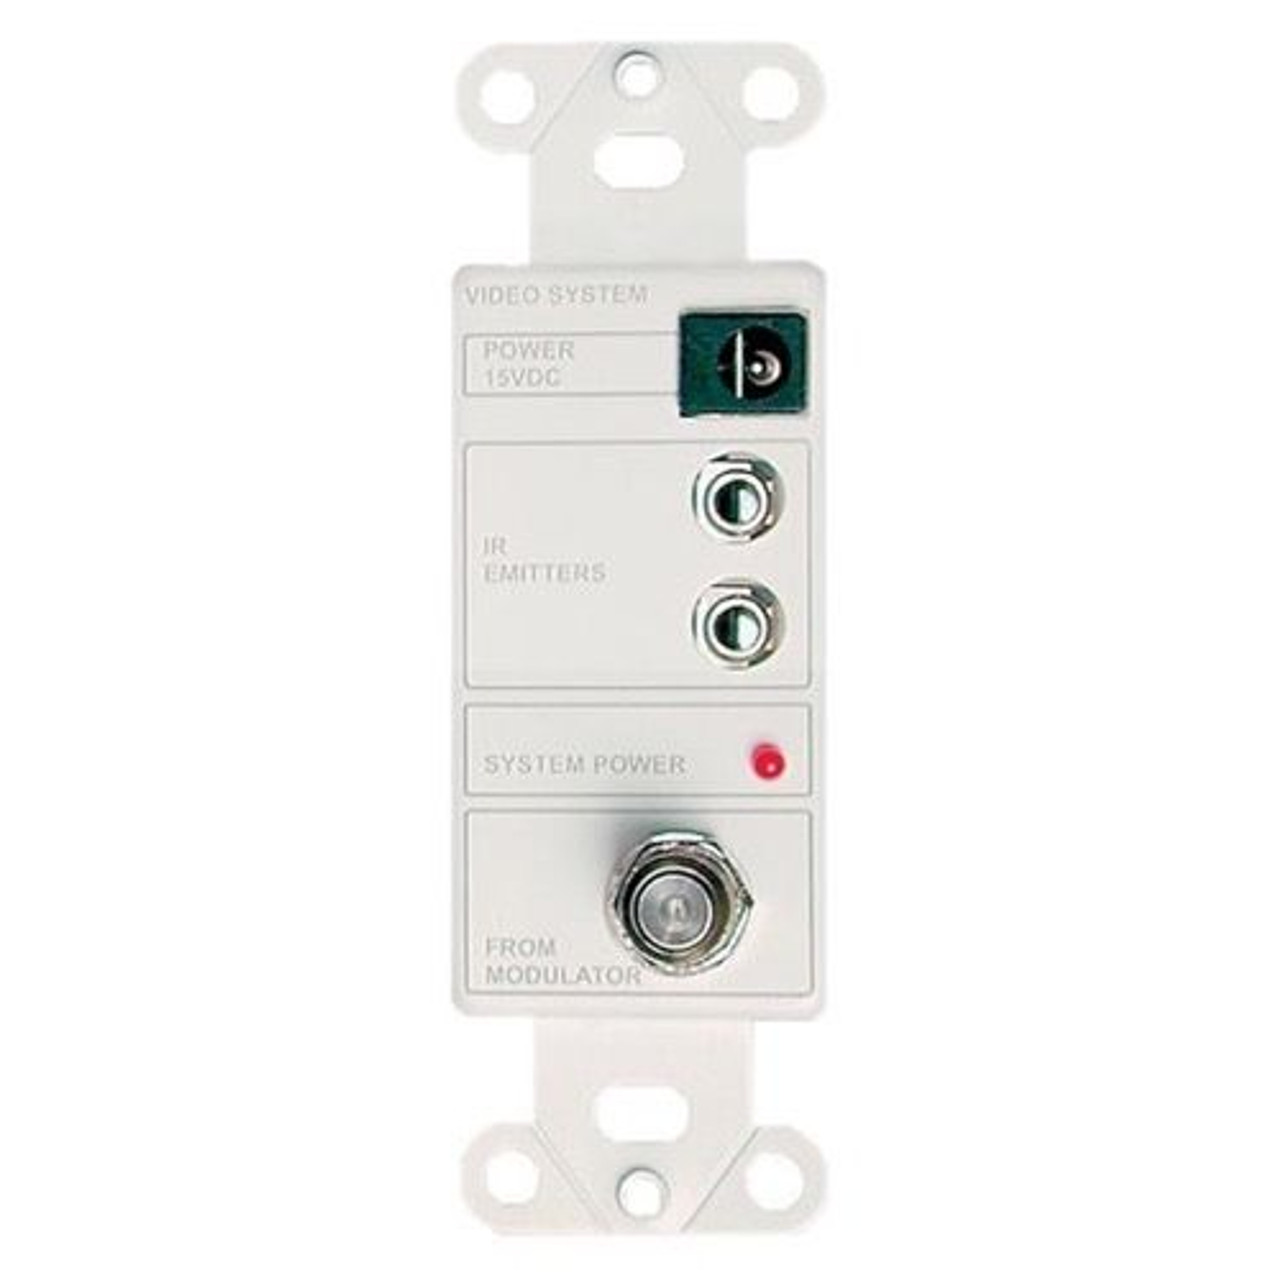 Linear 2010 In-Wall Power Injector Wall Plate IR Interface White Decora Style Insert with Two IR Emitter Ports and RF Output Interface Module Power Jack for Remote Power